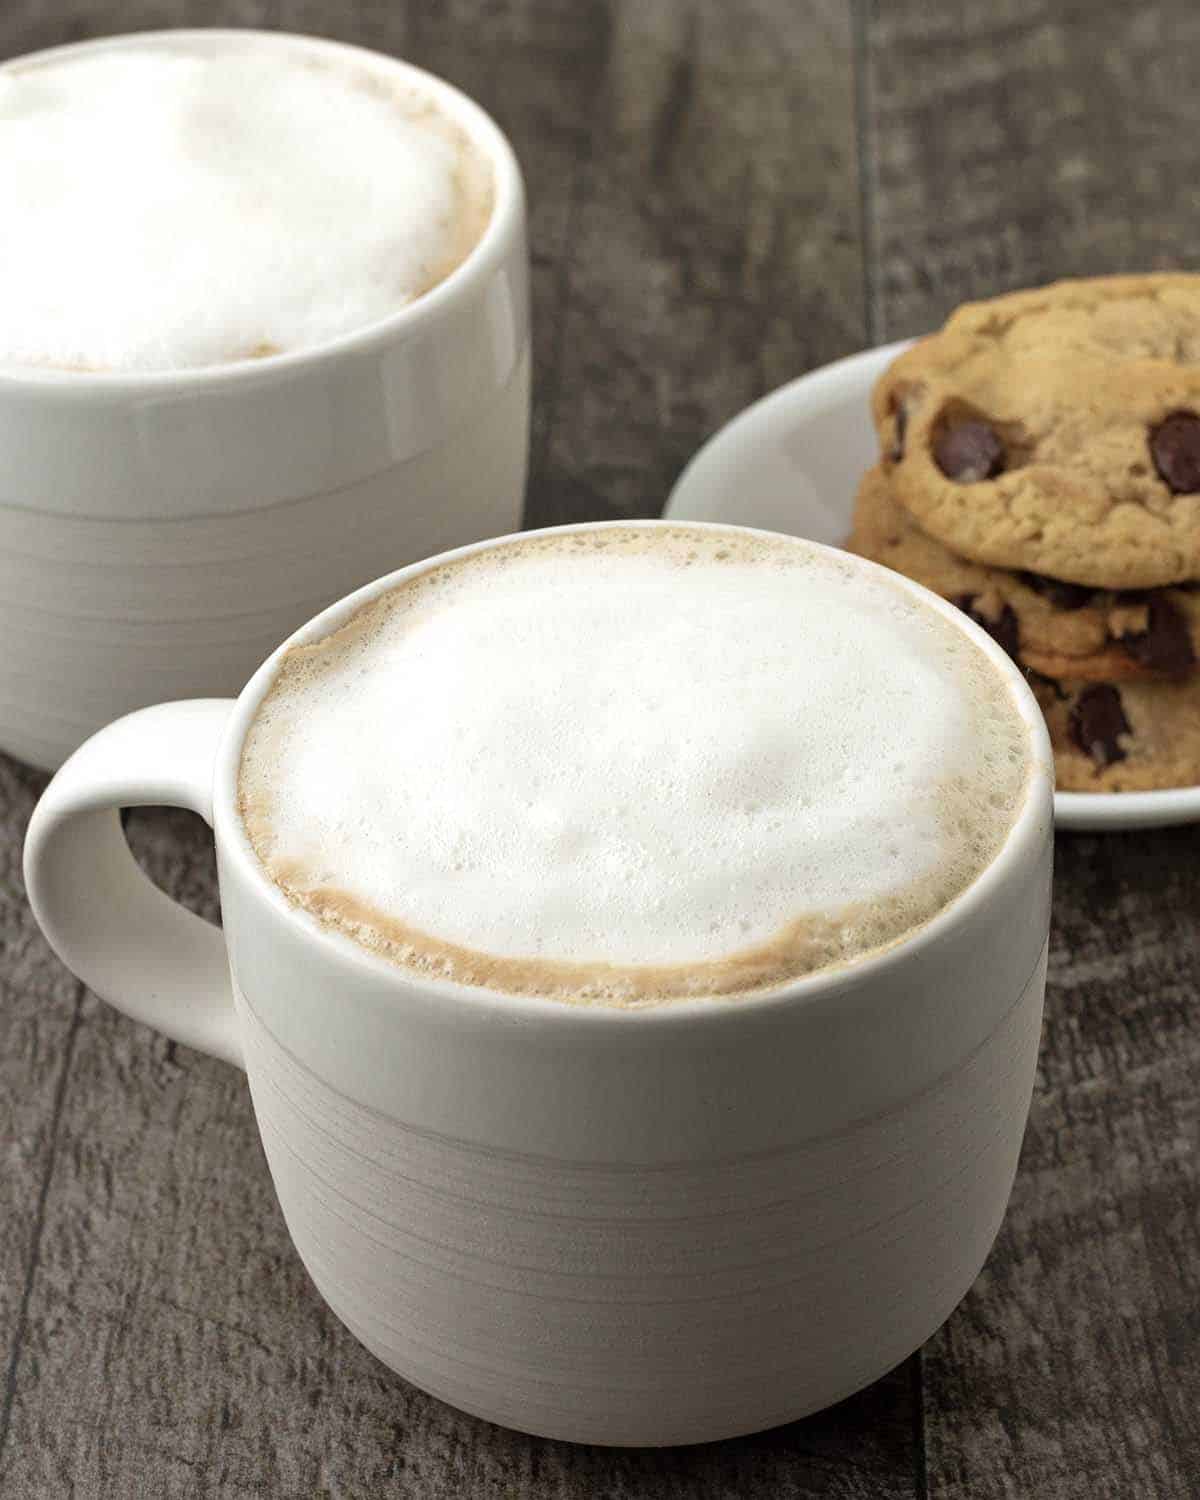 Two hot almond milk lattes in mugs on a table, a dish of cookies sit behind the mugs.